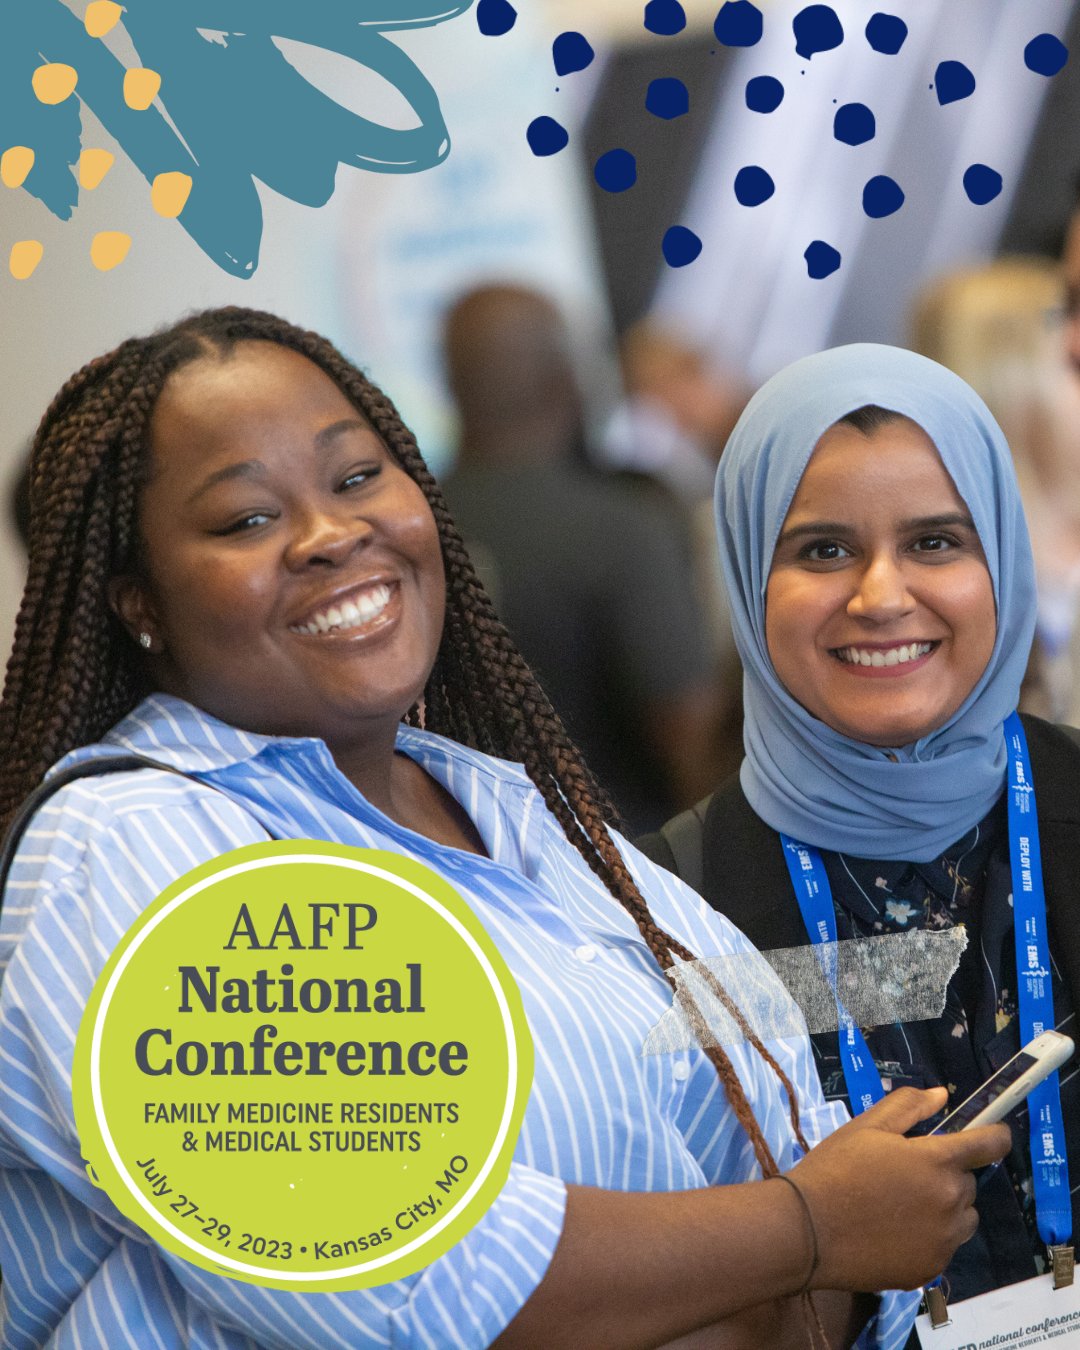 AAFP on Twitter "Registration for our 2023 National Conference opens